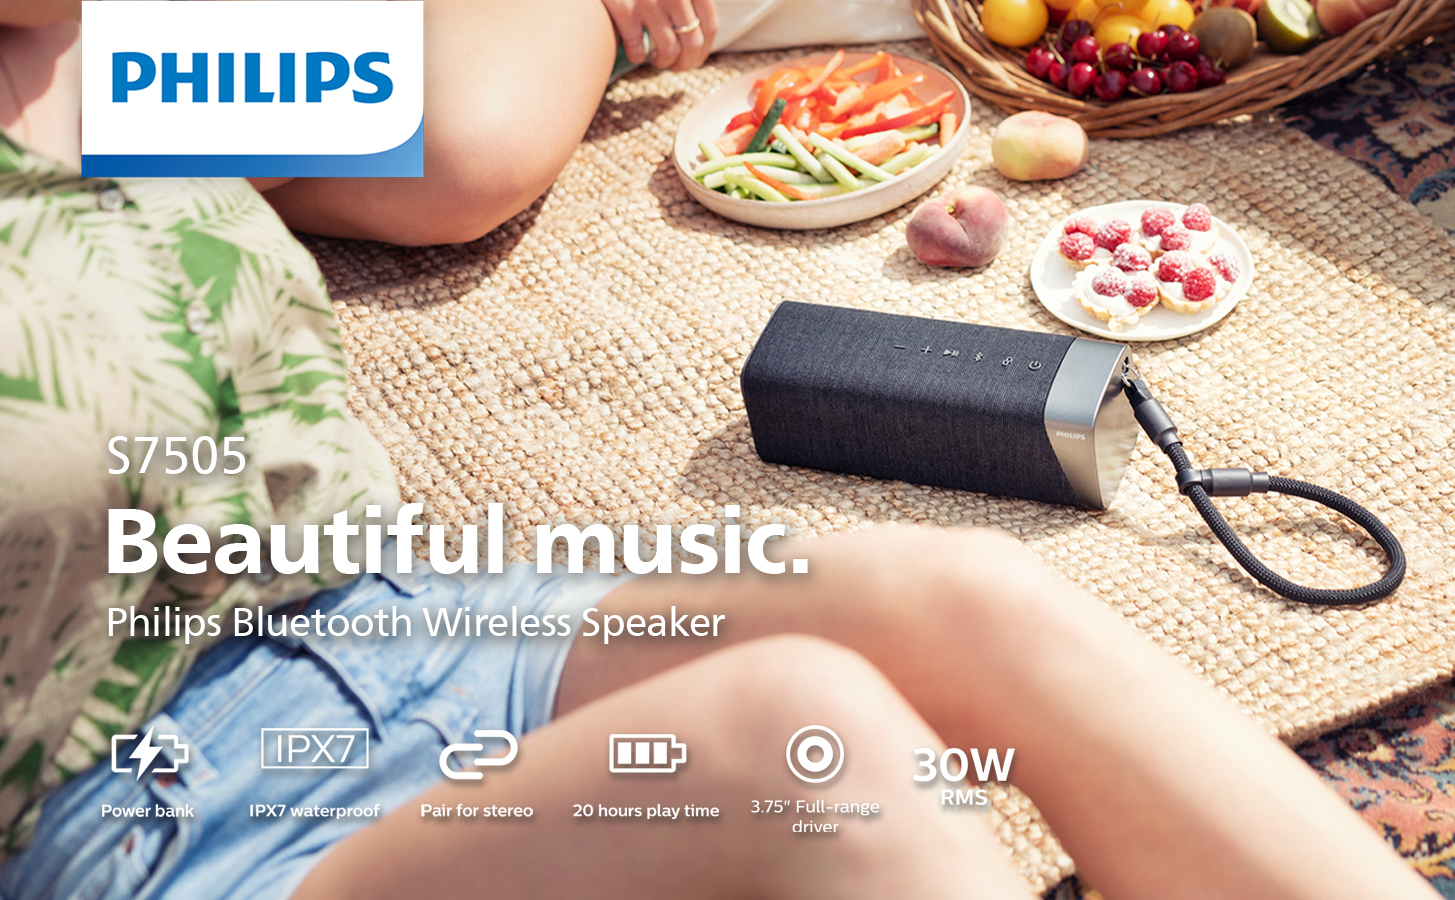 Power-Bank, S7505 Wireless Size, Philips Gray, Large Speaker TAS7505 Built-in Bluetooth with